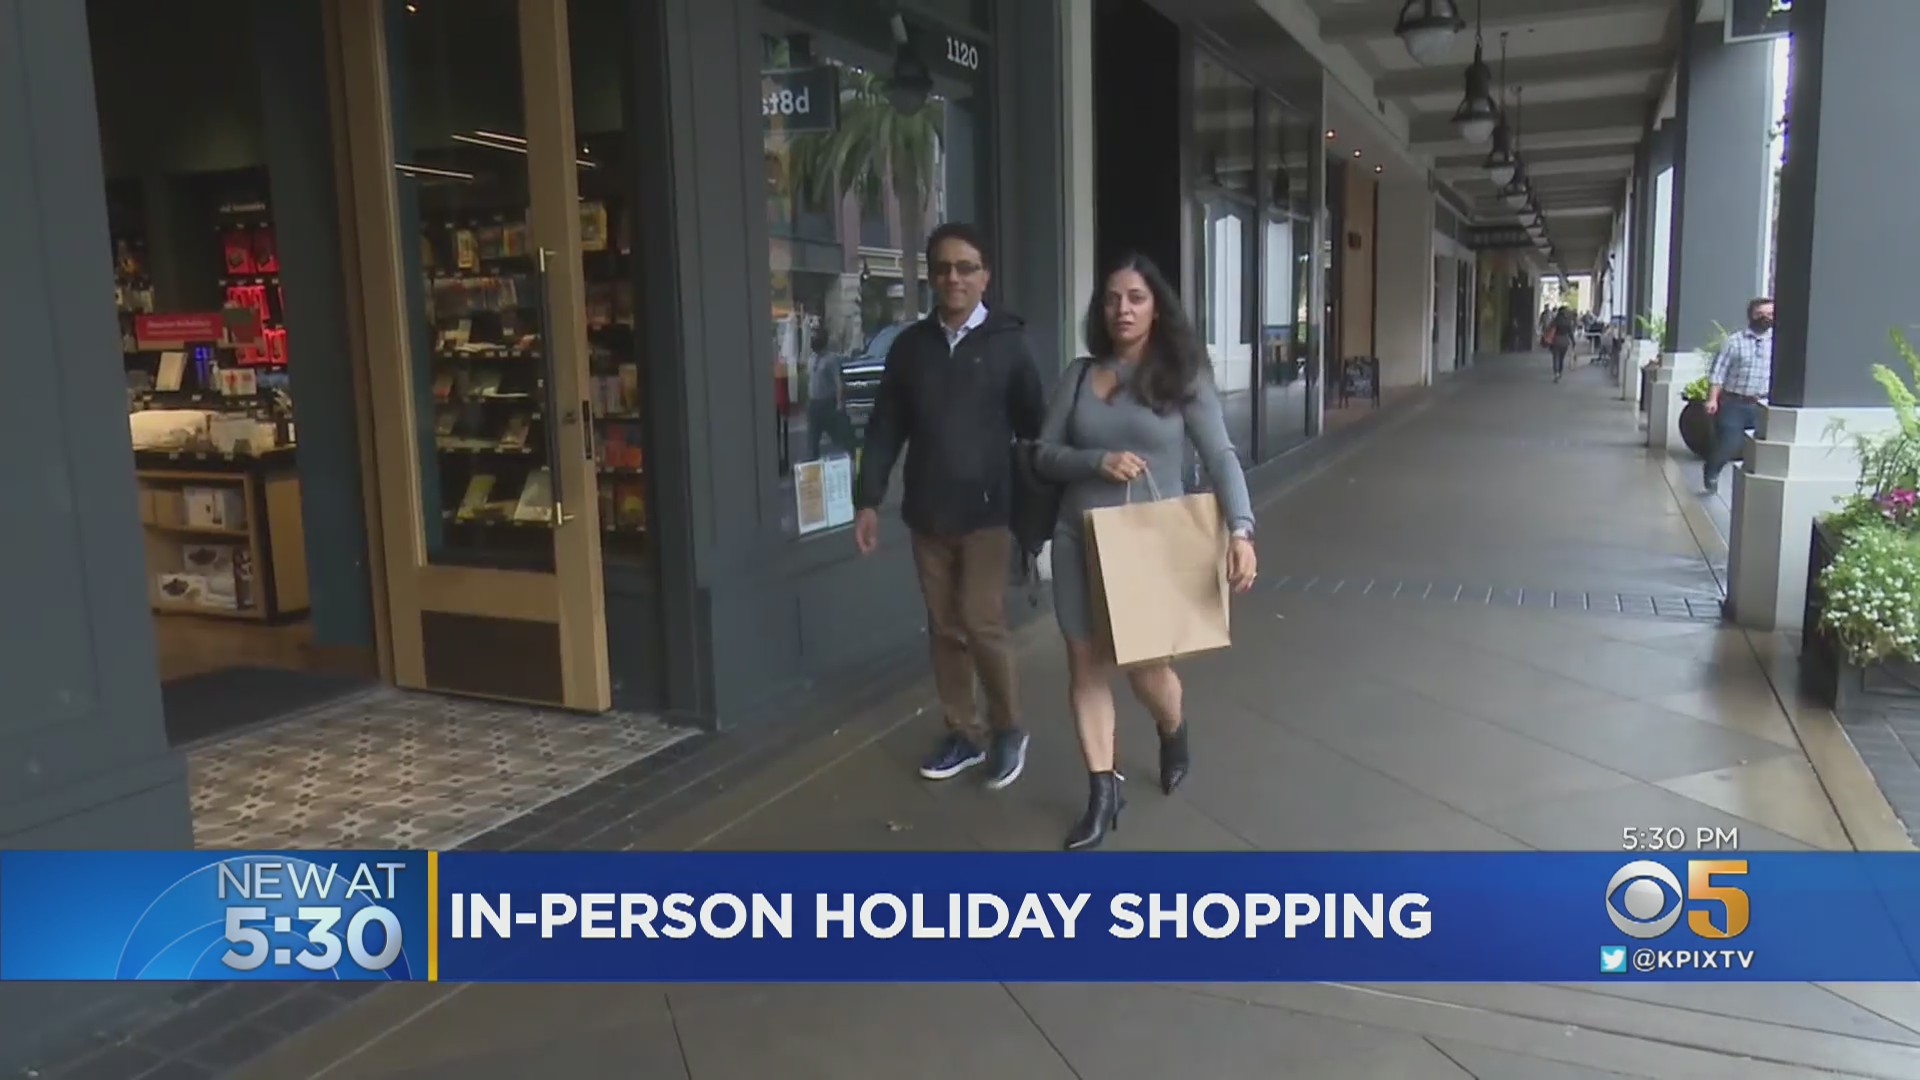 Retail Forecast Bright As Holiday Shoppers Return To High-End Stores, Malls